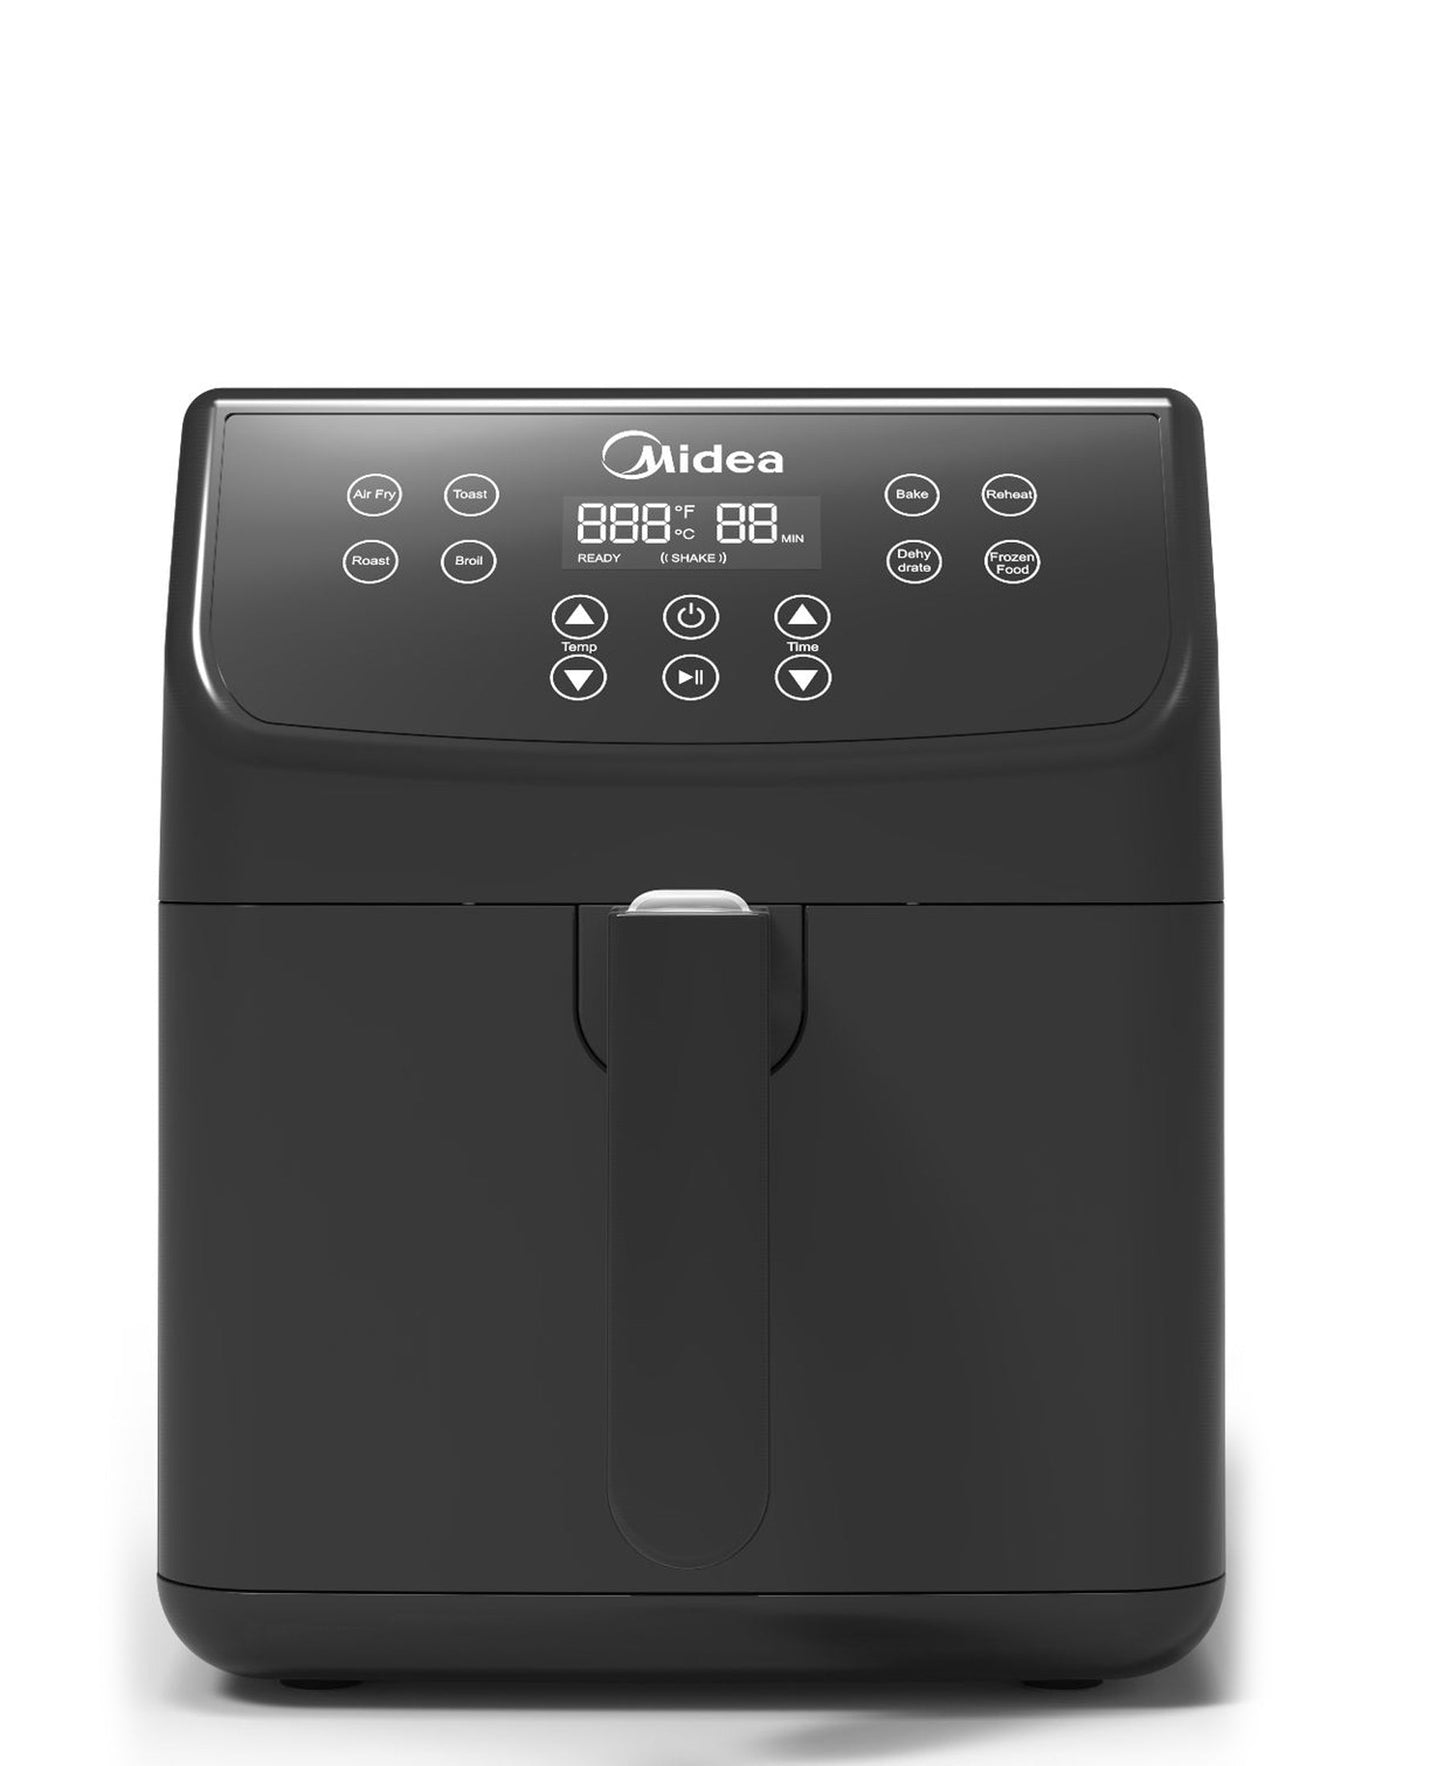 Philips Essential Touch Screen XL Air Fryer 6.2L - Black – Bawas